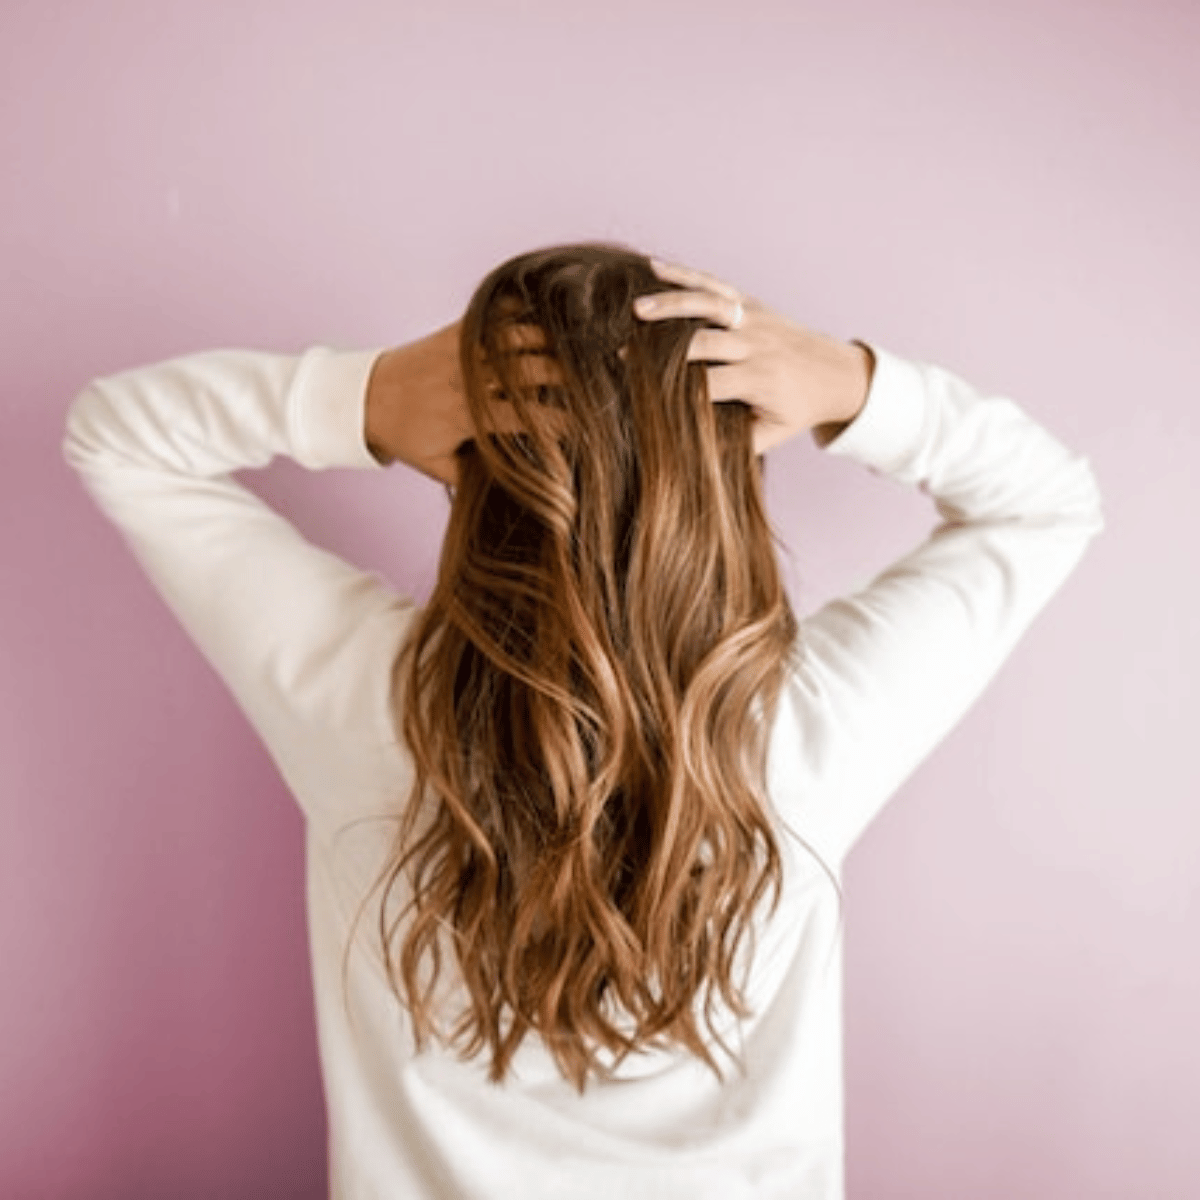 3 Easy Tips for a Sustainable Hair Care Routine